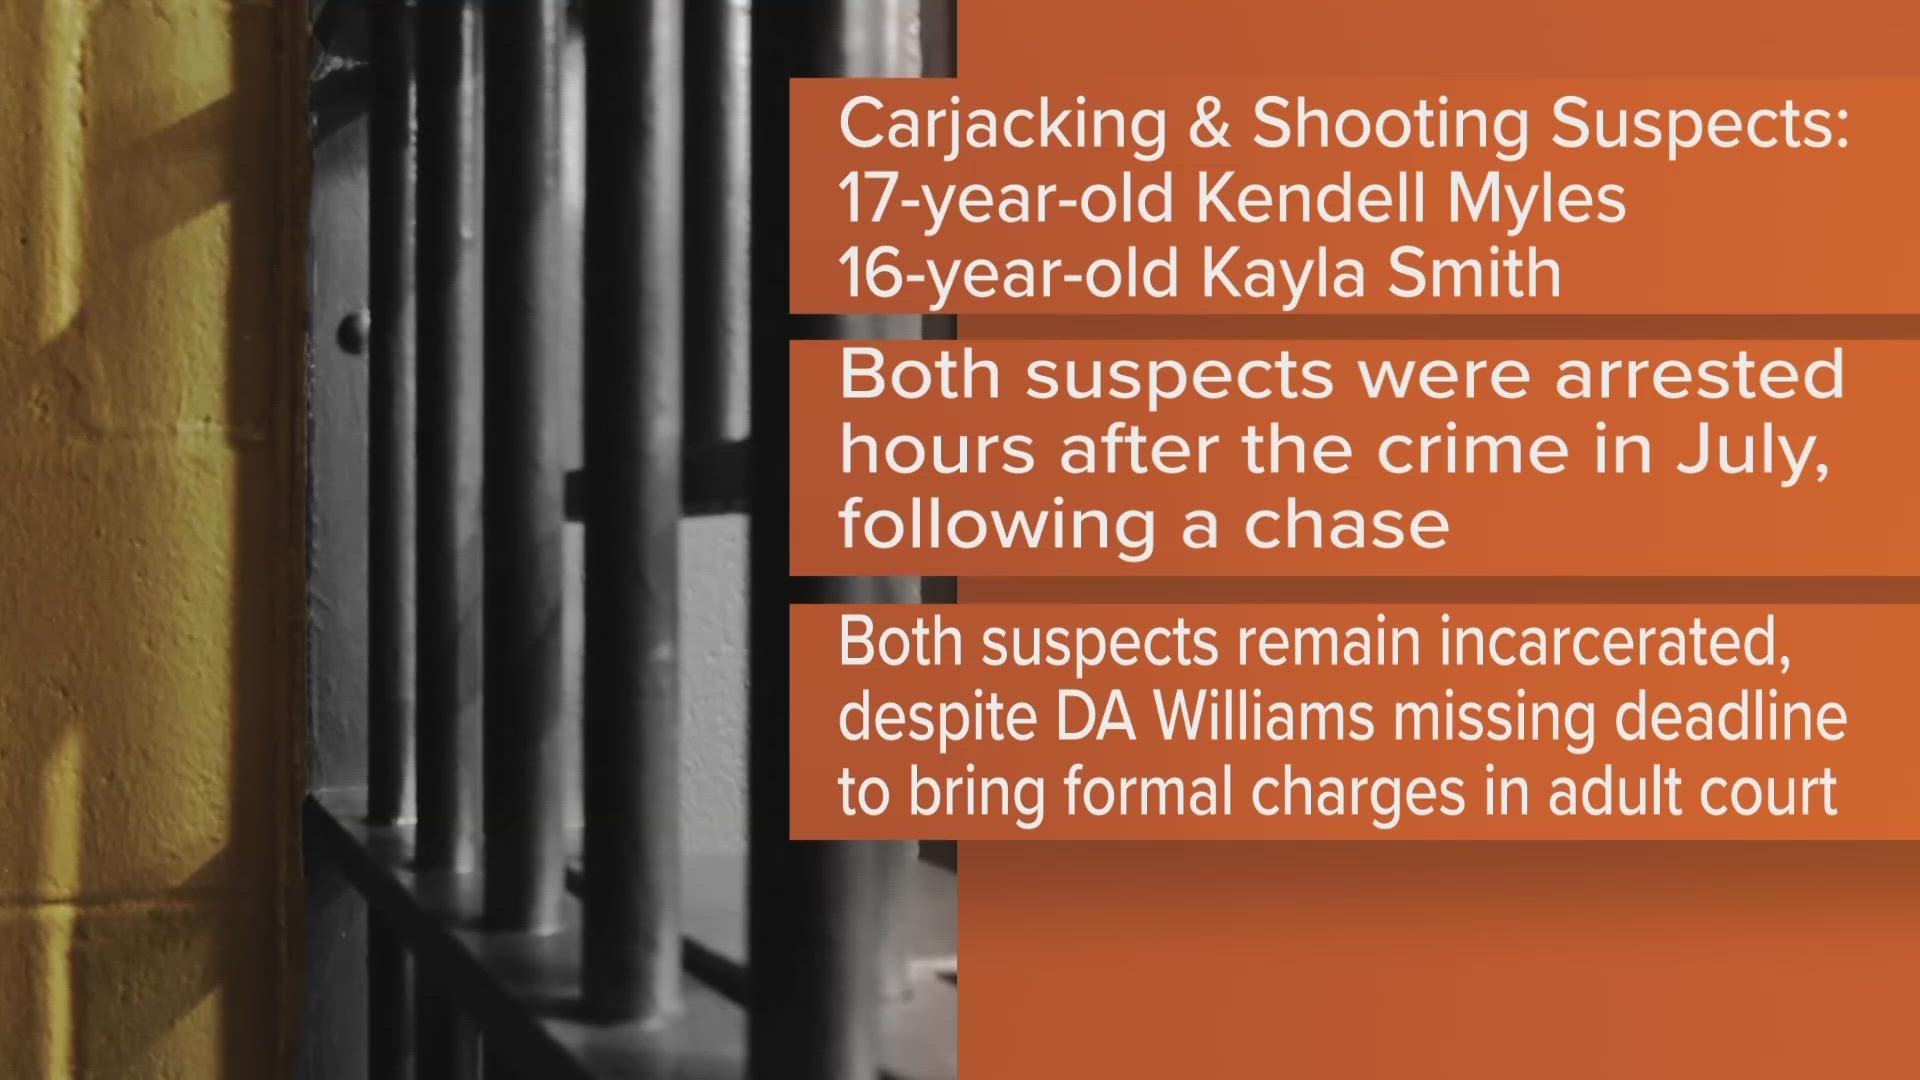 17-year-old Kendell Myles is accused of shooting and carjacking 59-year-old Scott Toups on Loyola Avenue last July.